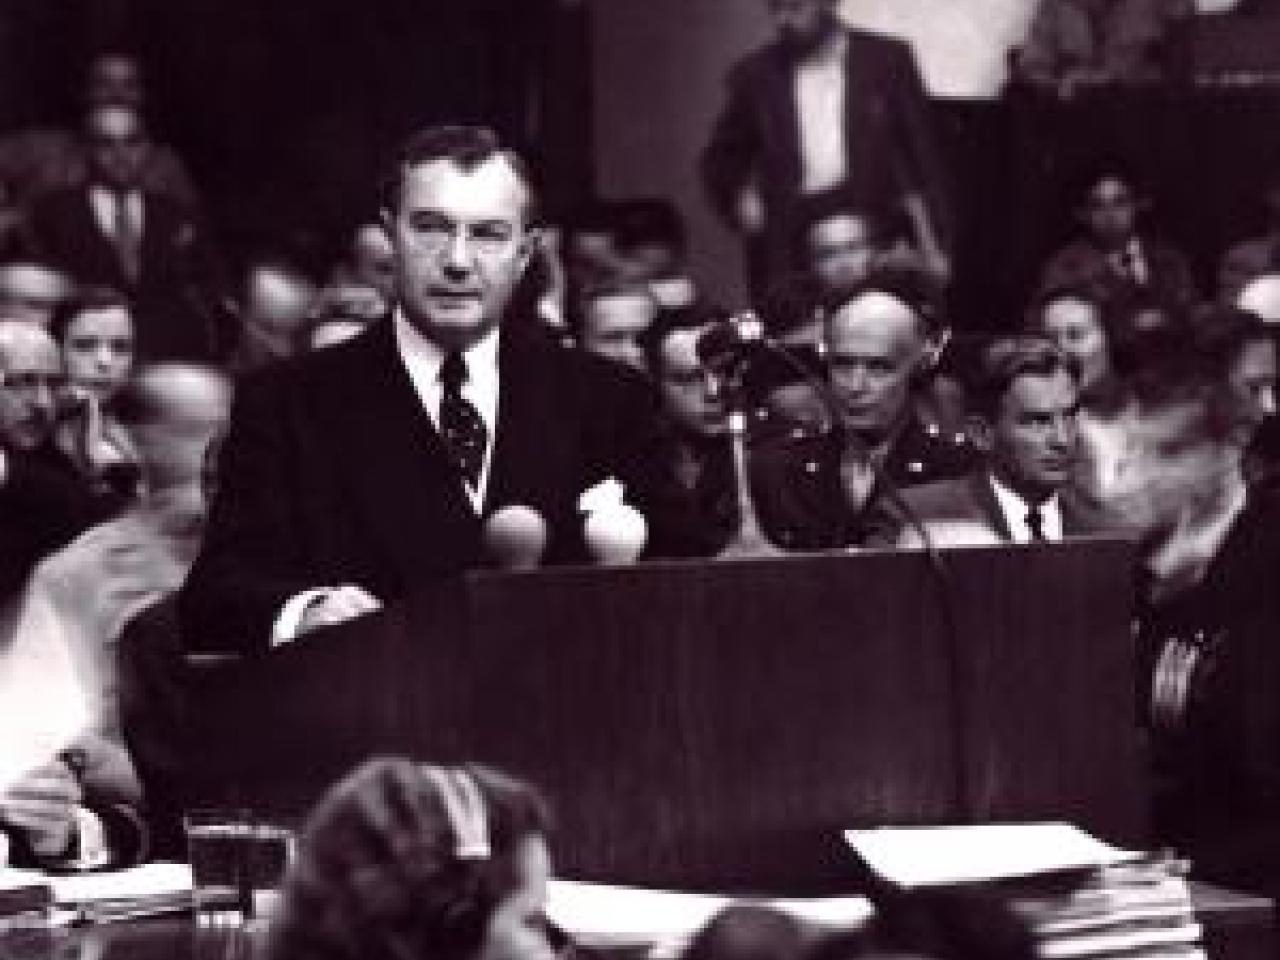 A black and white image from the film Nuremberg: Its Lesson for Today. A man in a suit stands at a podium with a serious expression looking slightly off to the side. Behind him sits a full audience of people, looking in different directions with serious expressions on their faces. In front of the podium sit women with headsets on and large stacks of paper in front of them.